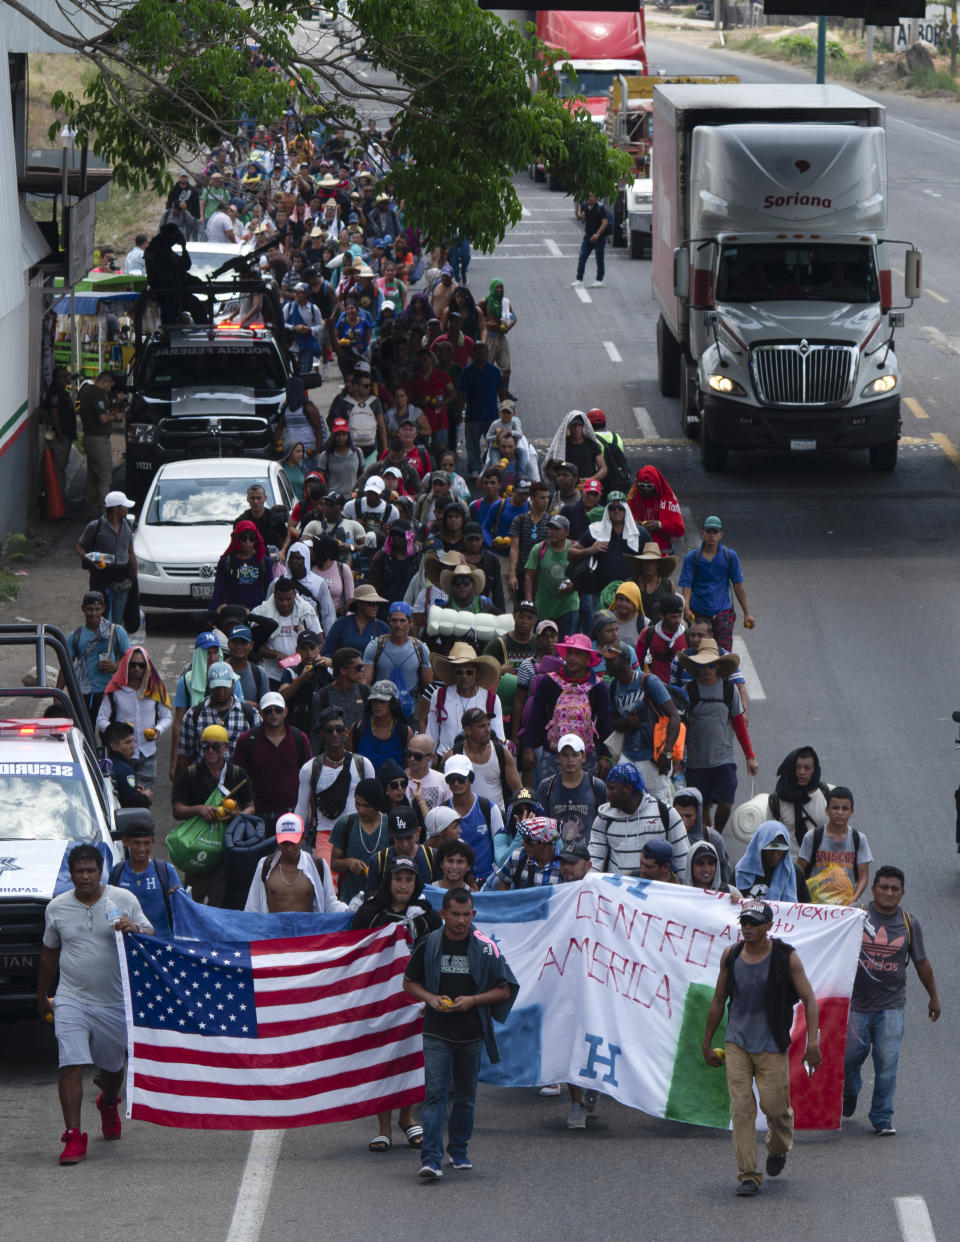 Central American migrants, part of the caravan hoping to reach the U.S. border, move on a road in Tapachula, Chiapas State, Mexico, Thursday, March 28, 2019. A caravan of about 2,500 Central Americans and Cubans is currently making its way through Mexico's southern state of Chiapas. (AP Photo/Isabel Mateos)